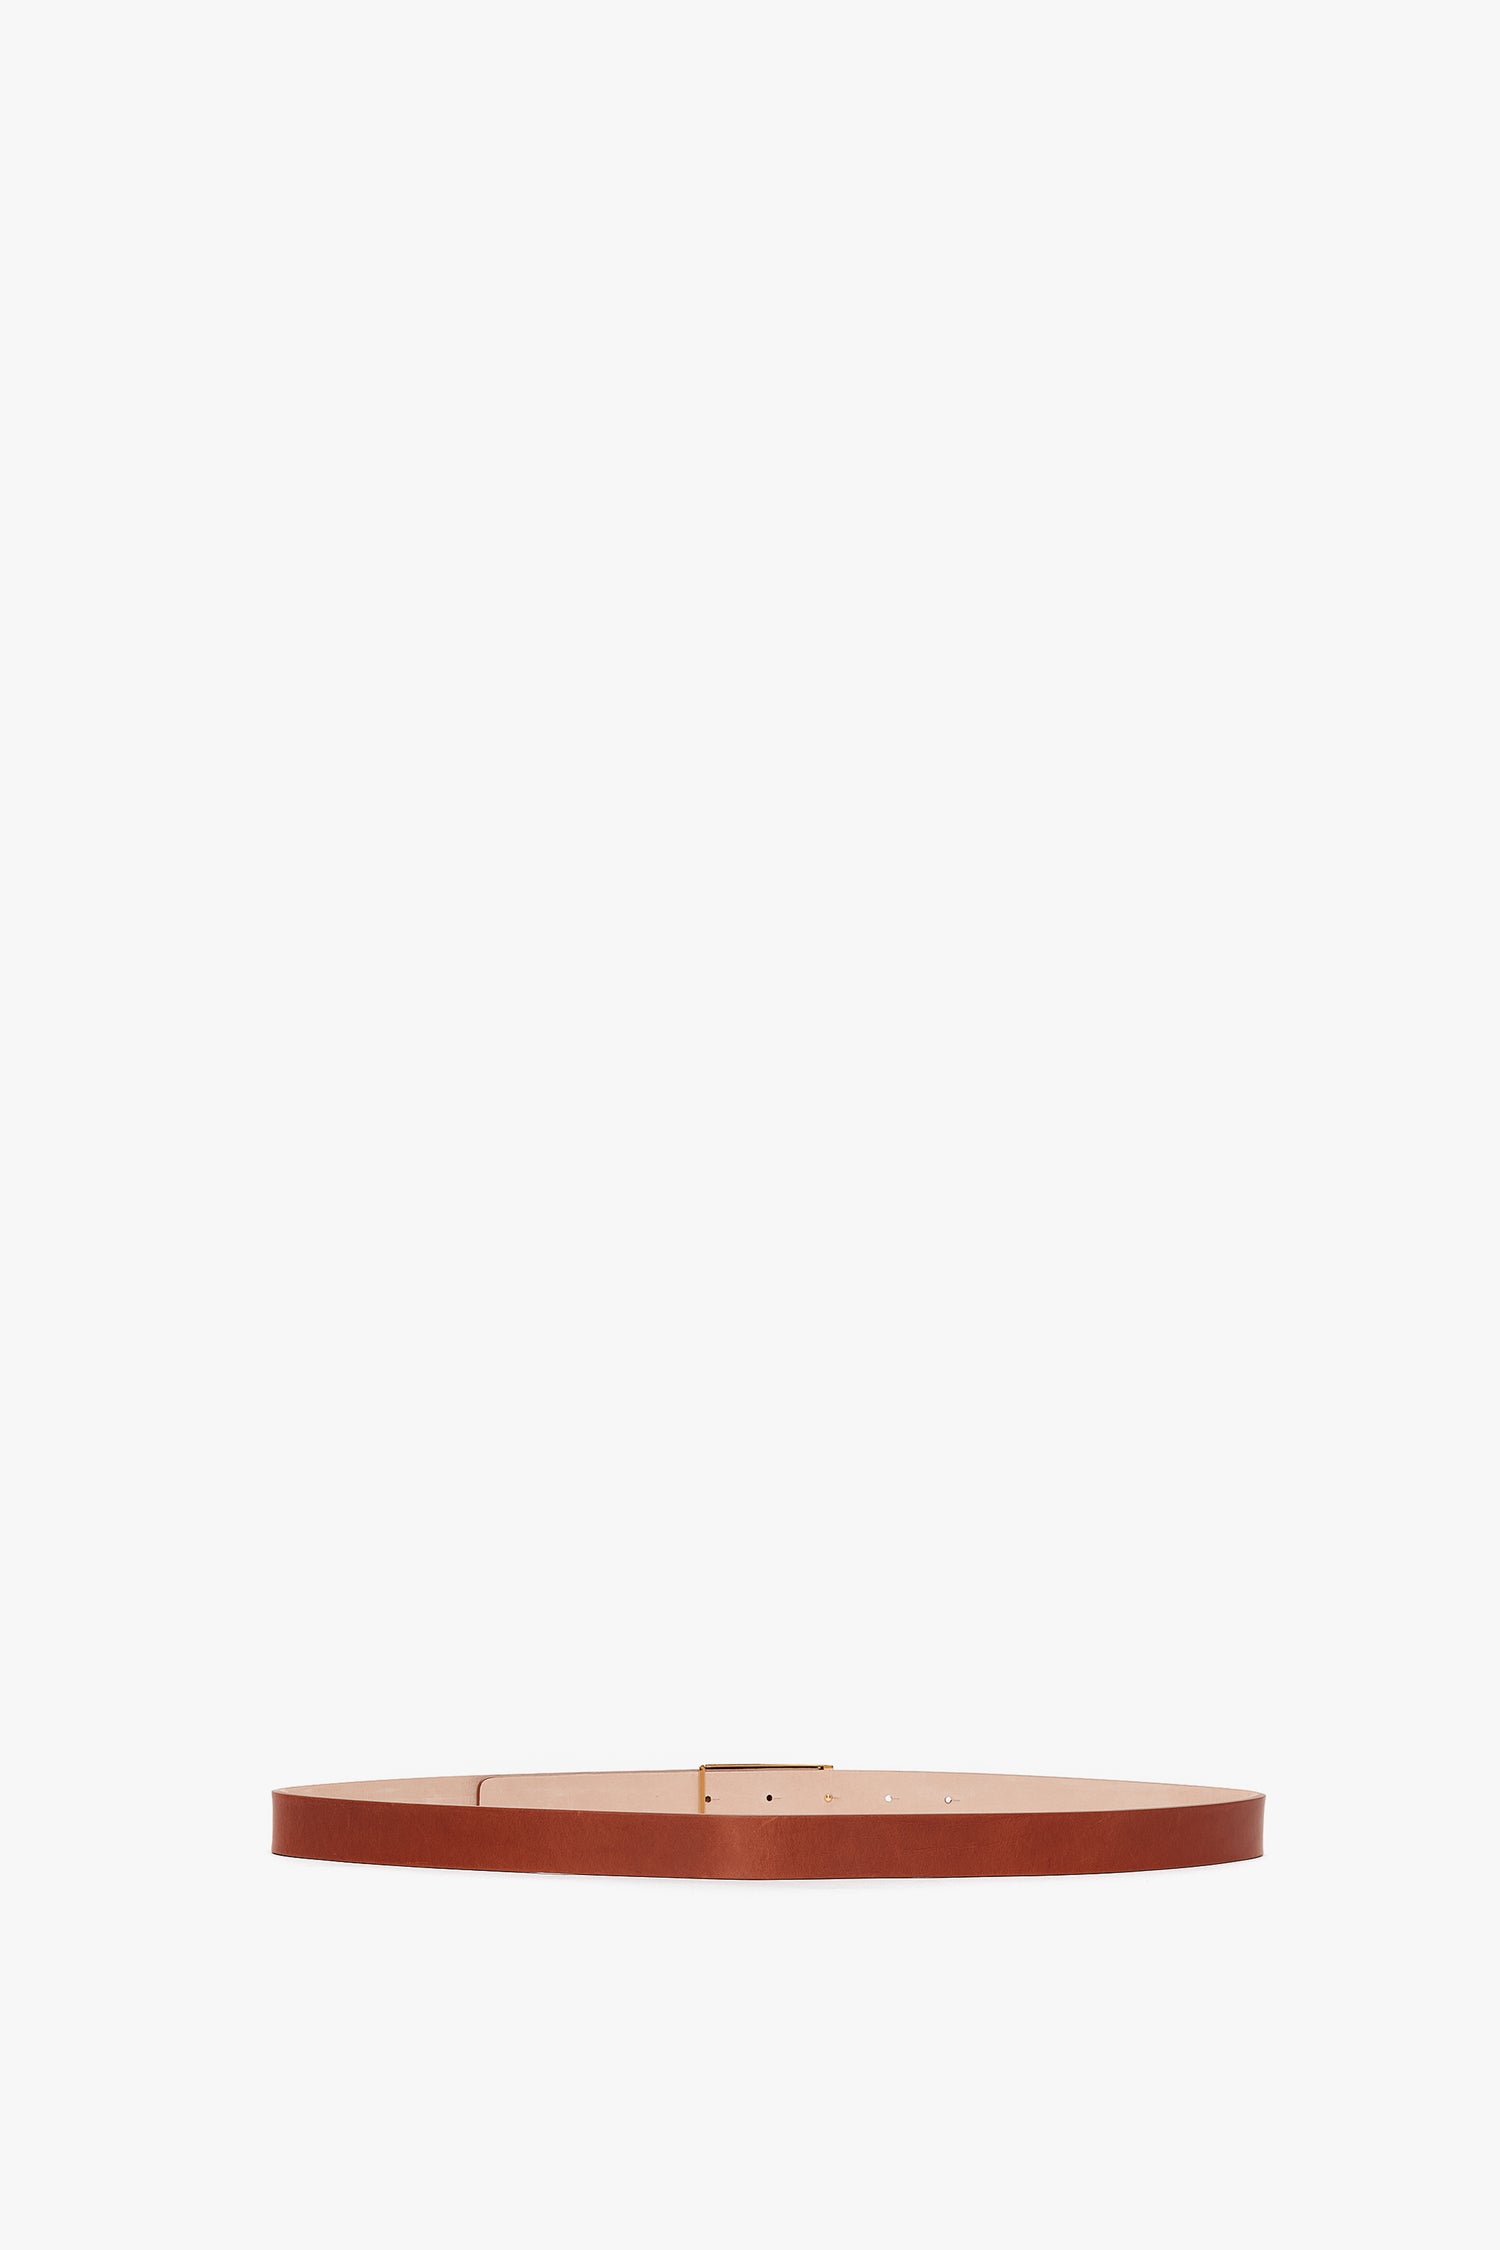 Exclusive Frame Buckle Belt in Tan Leather by Victoria Beckham, displayed horizontally against a white background.